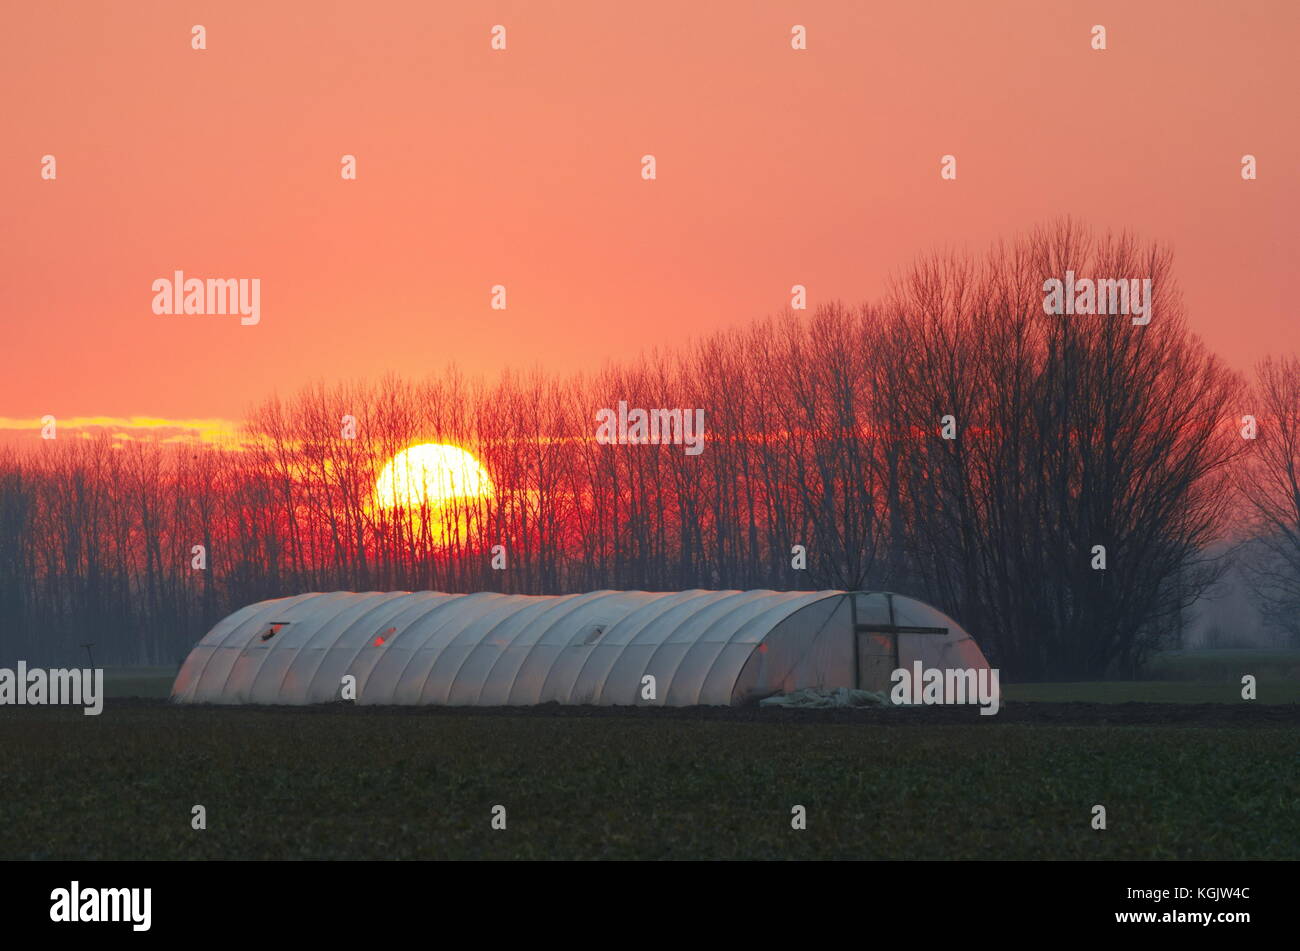 Agriculture Hothouse on the Field at Sunset Stock Photo